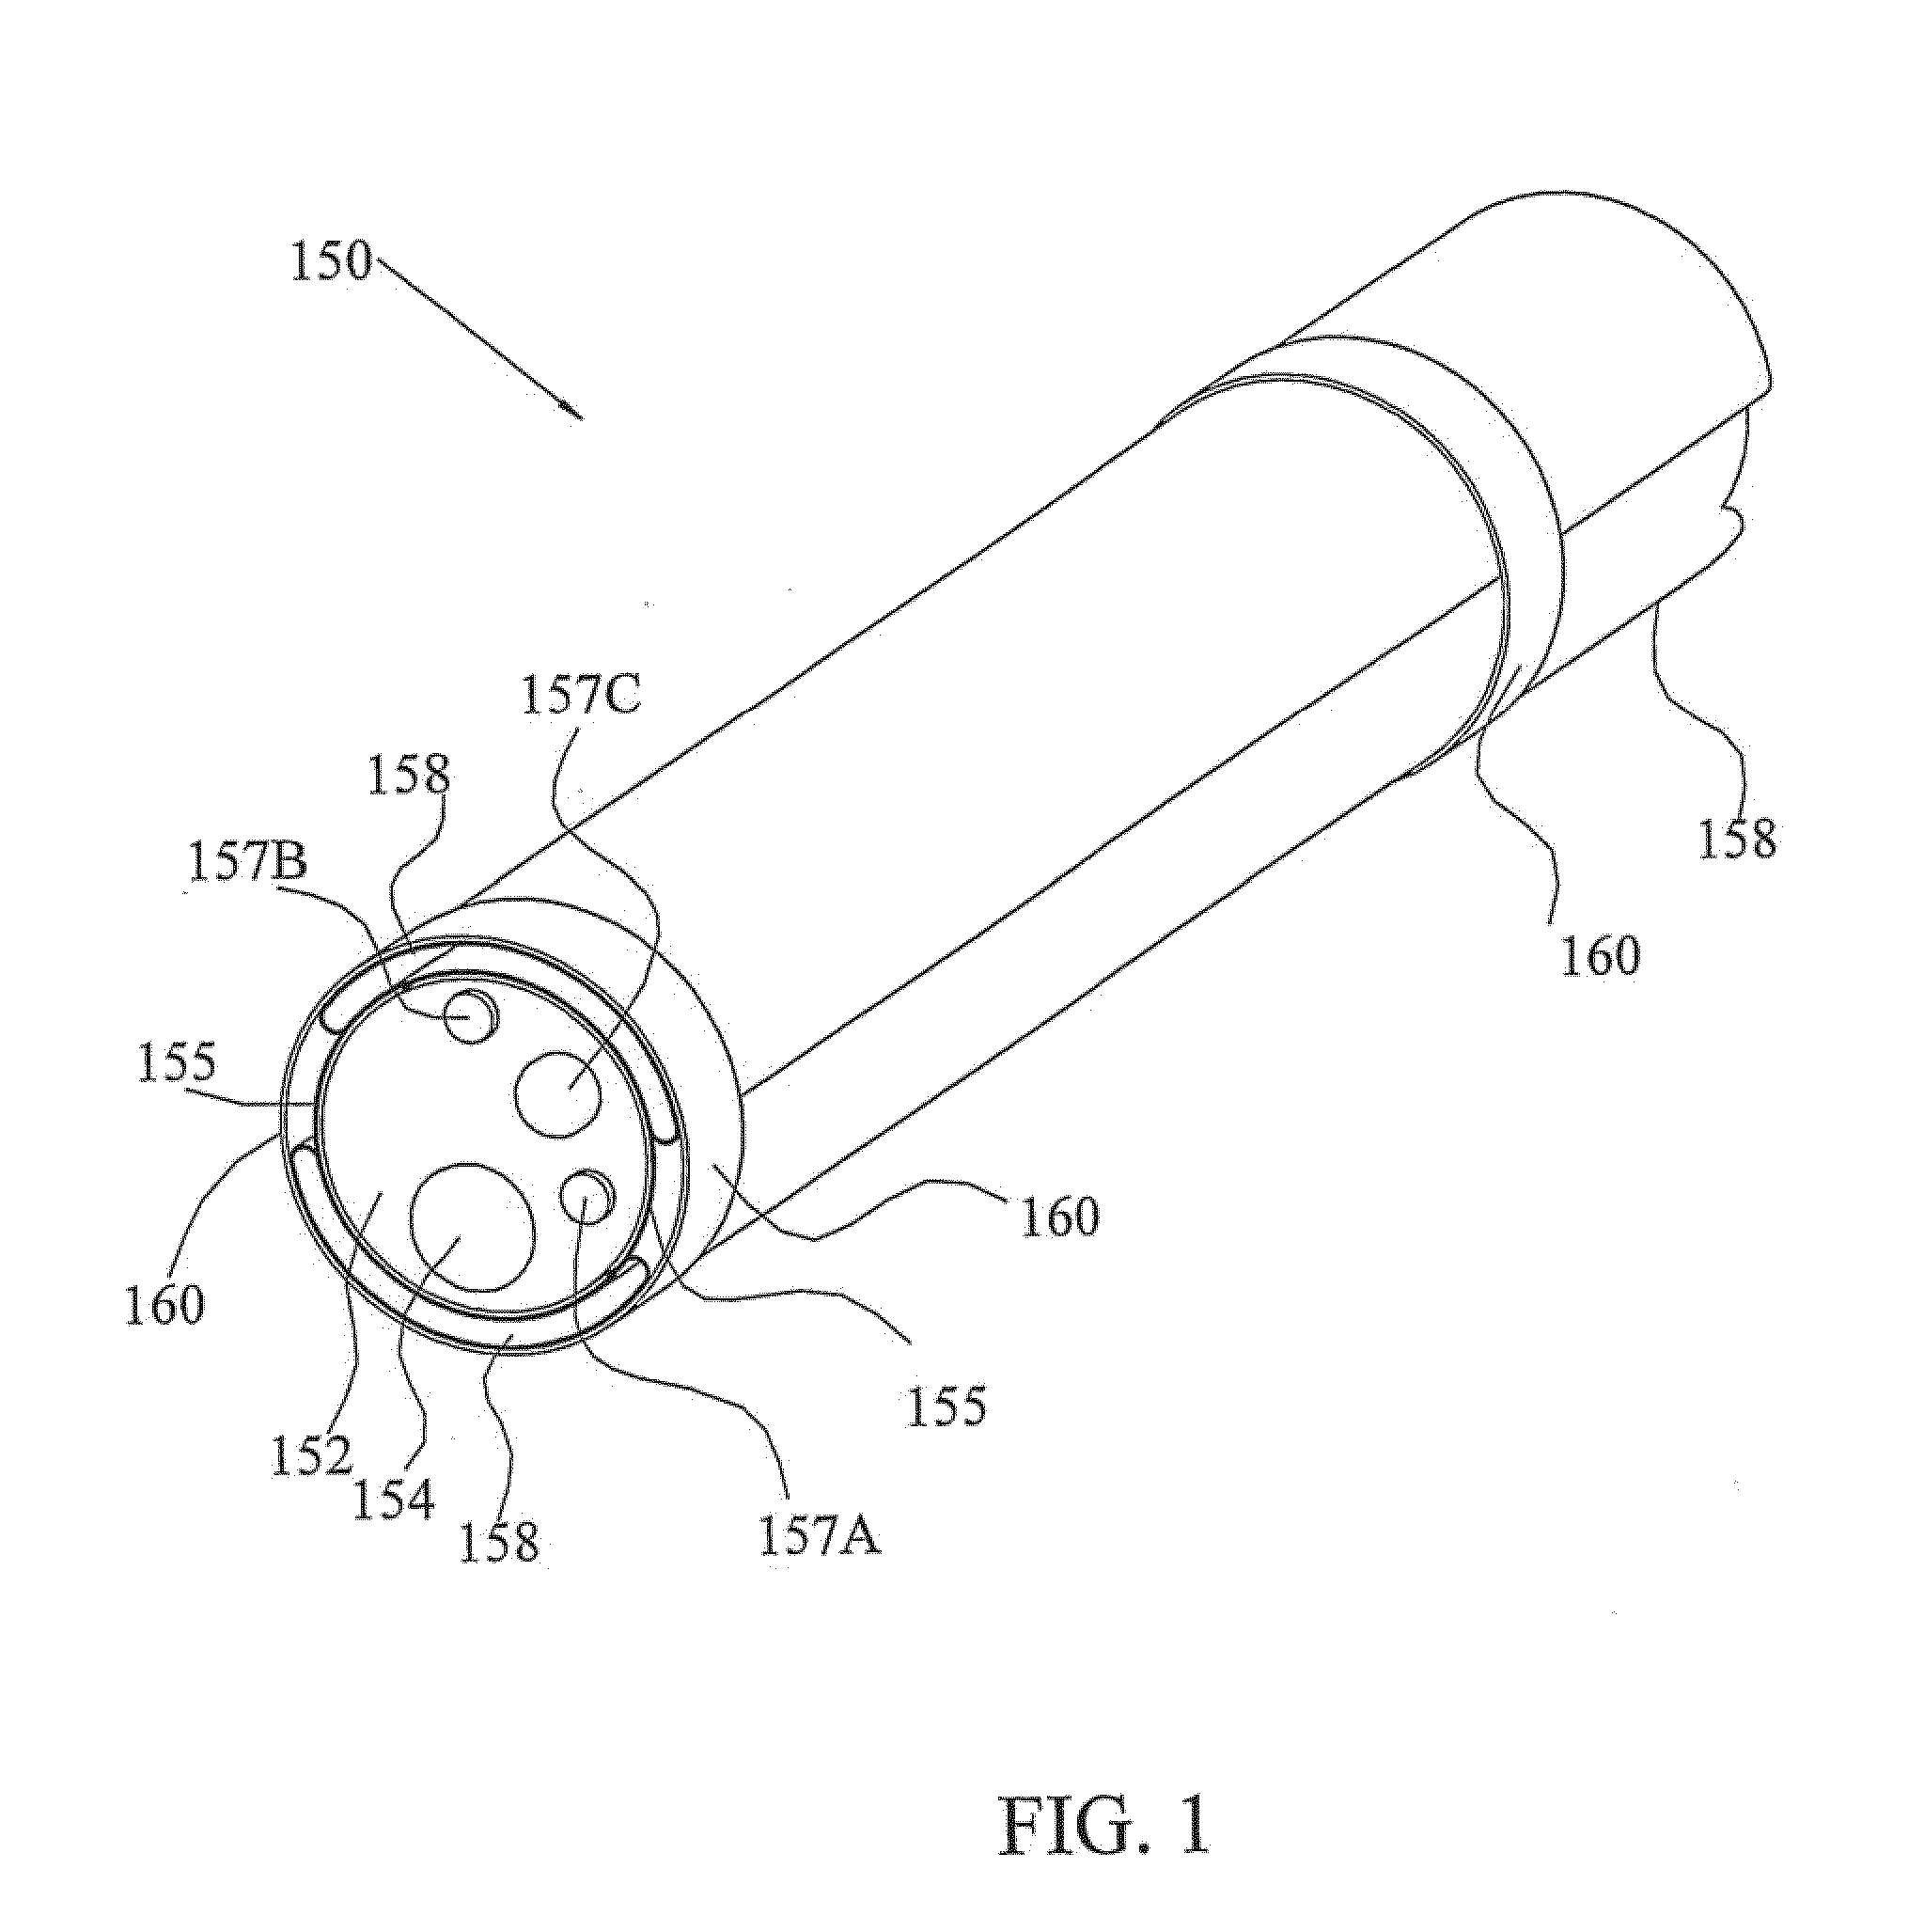 Tapered lumens for multi-lumen sleeves used in endoscopic procedures